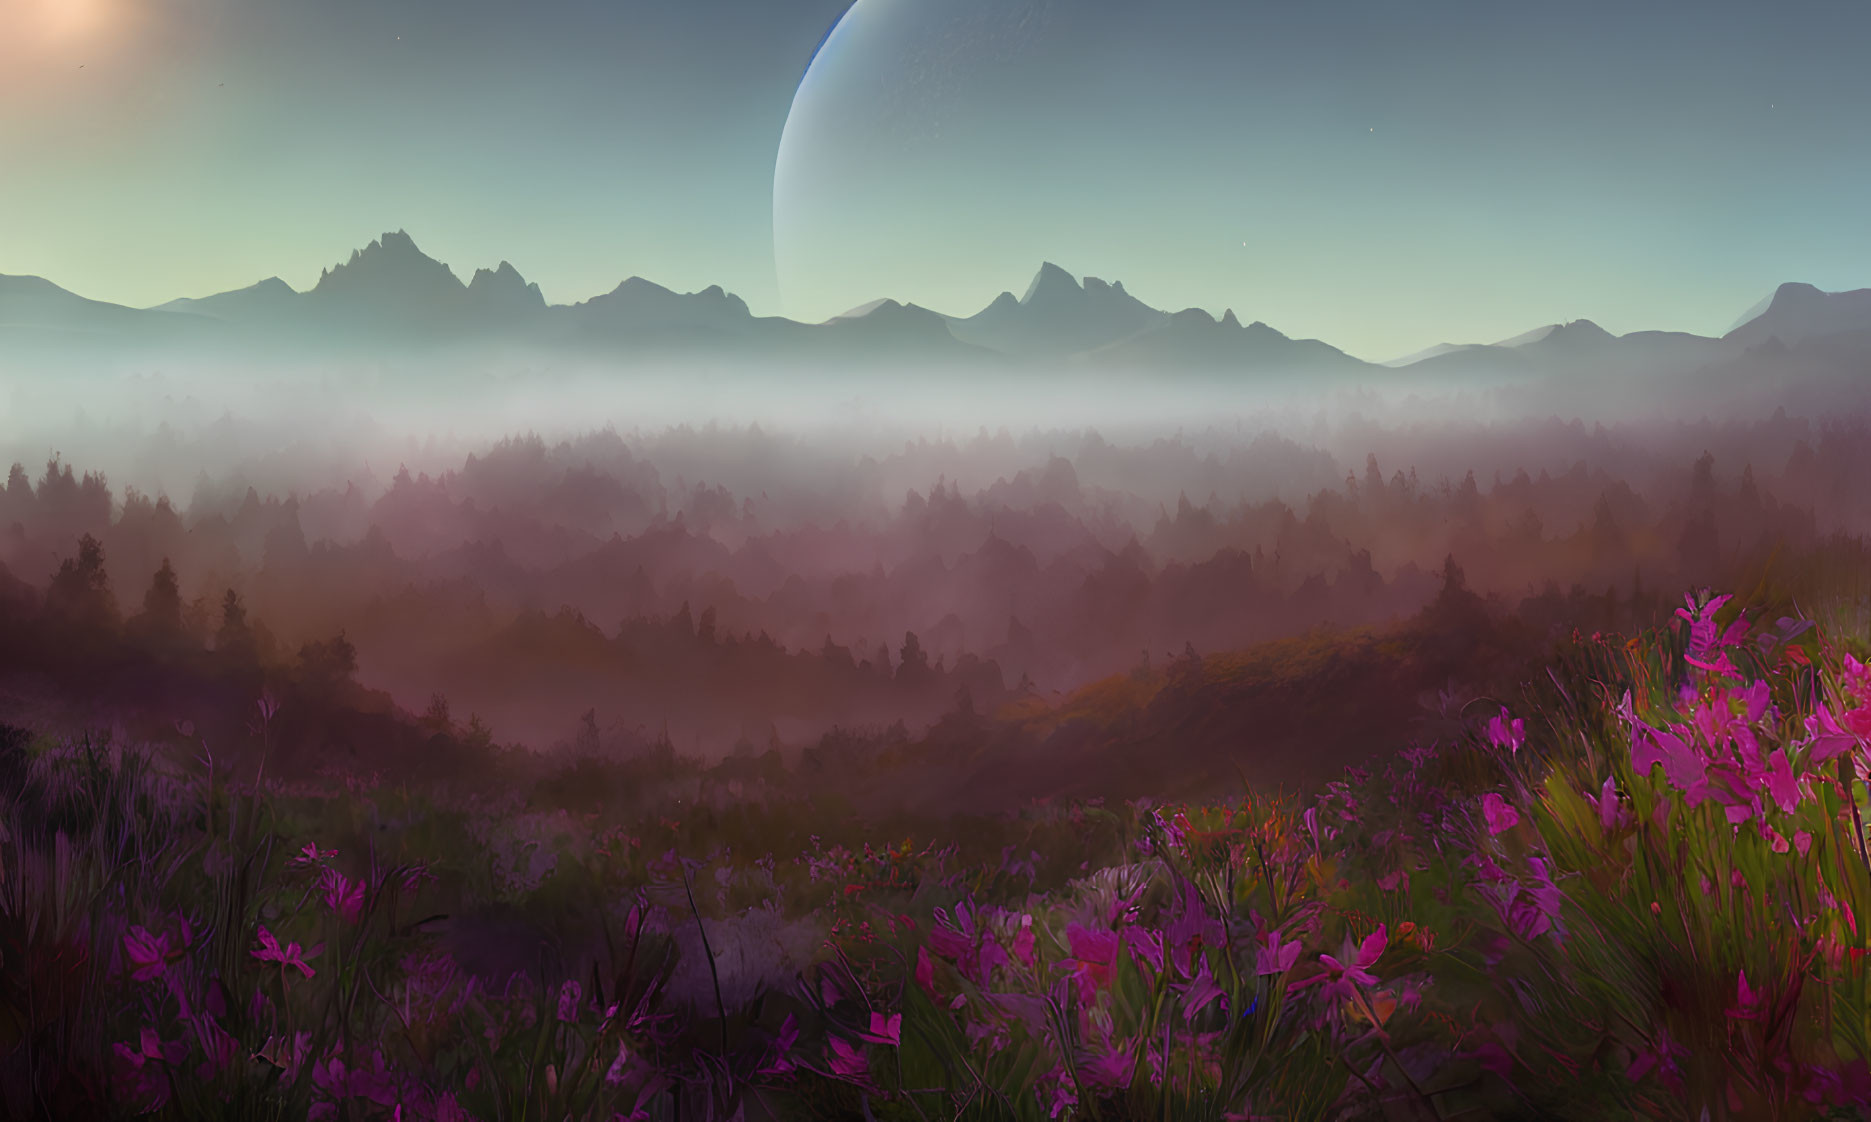 Alien landscape at dawn with purple flowers, forested hills, and mountains under a large moon